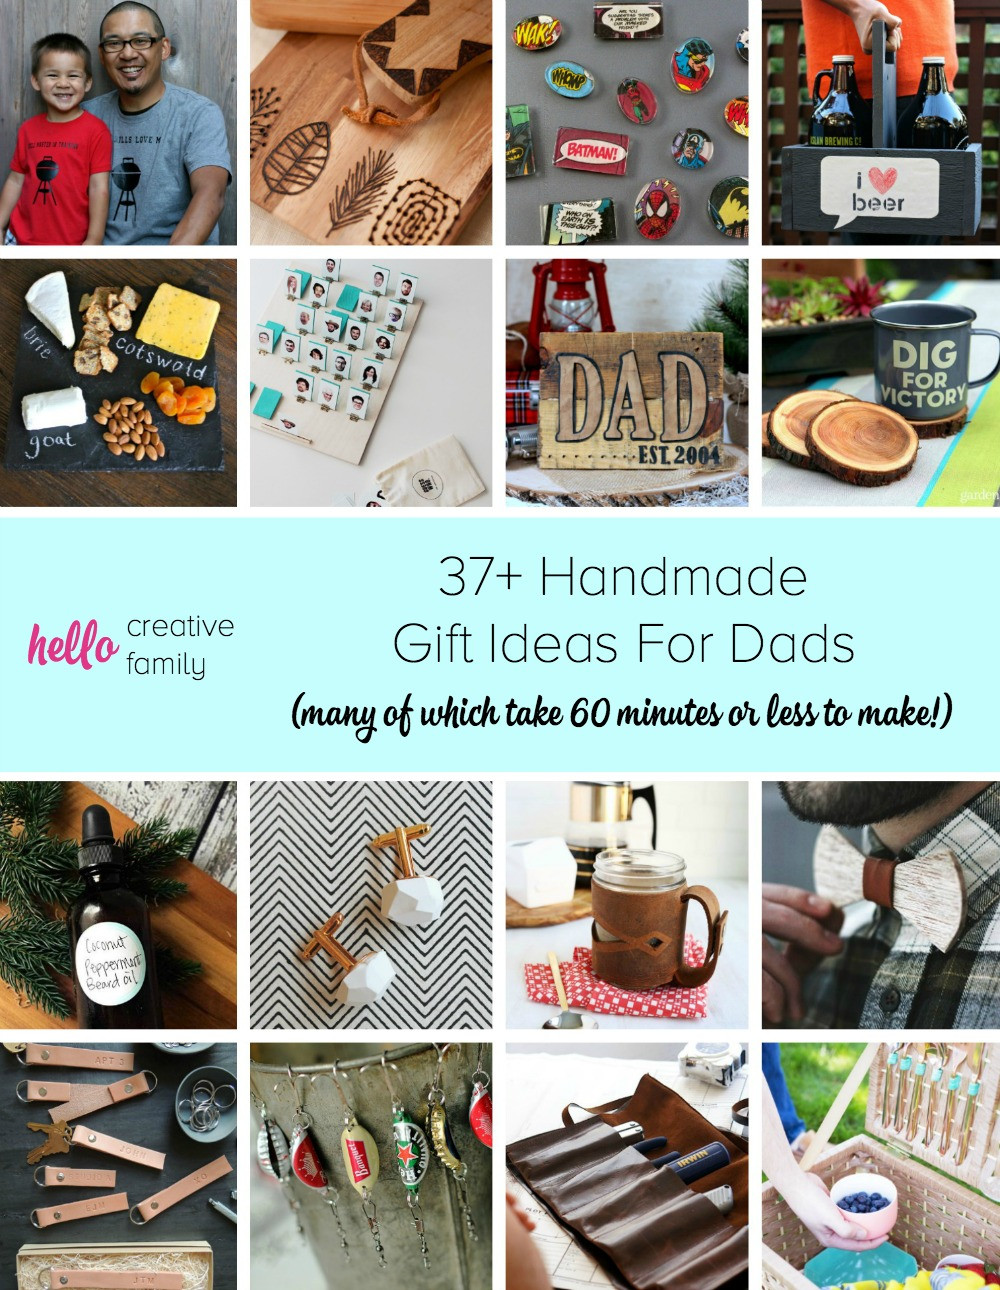 Christmas Gifts For Dad DIY
 37 Handmade Gift Ideas For Dads many of which take 60